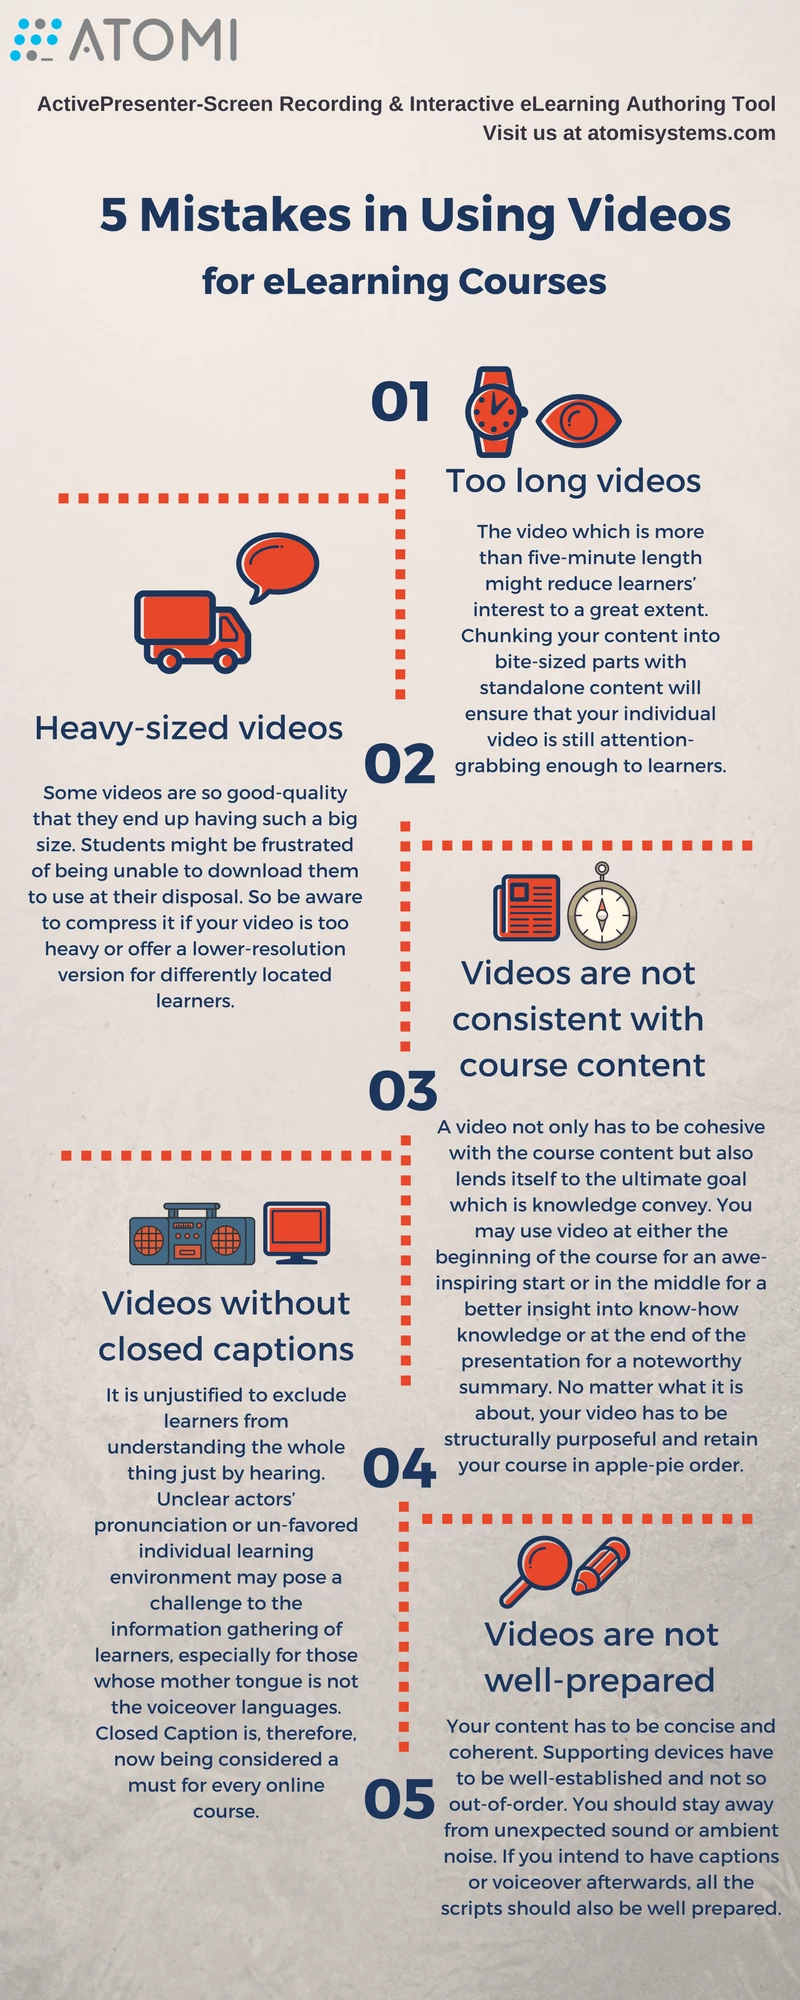 Mistakes in using videos for eLearning courses